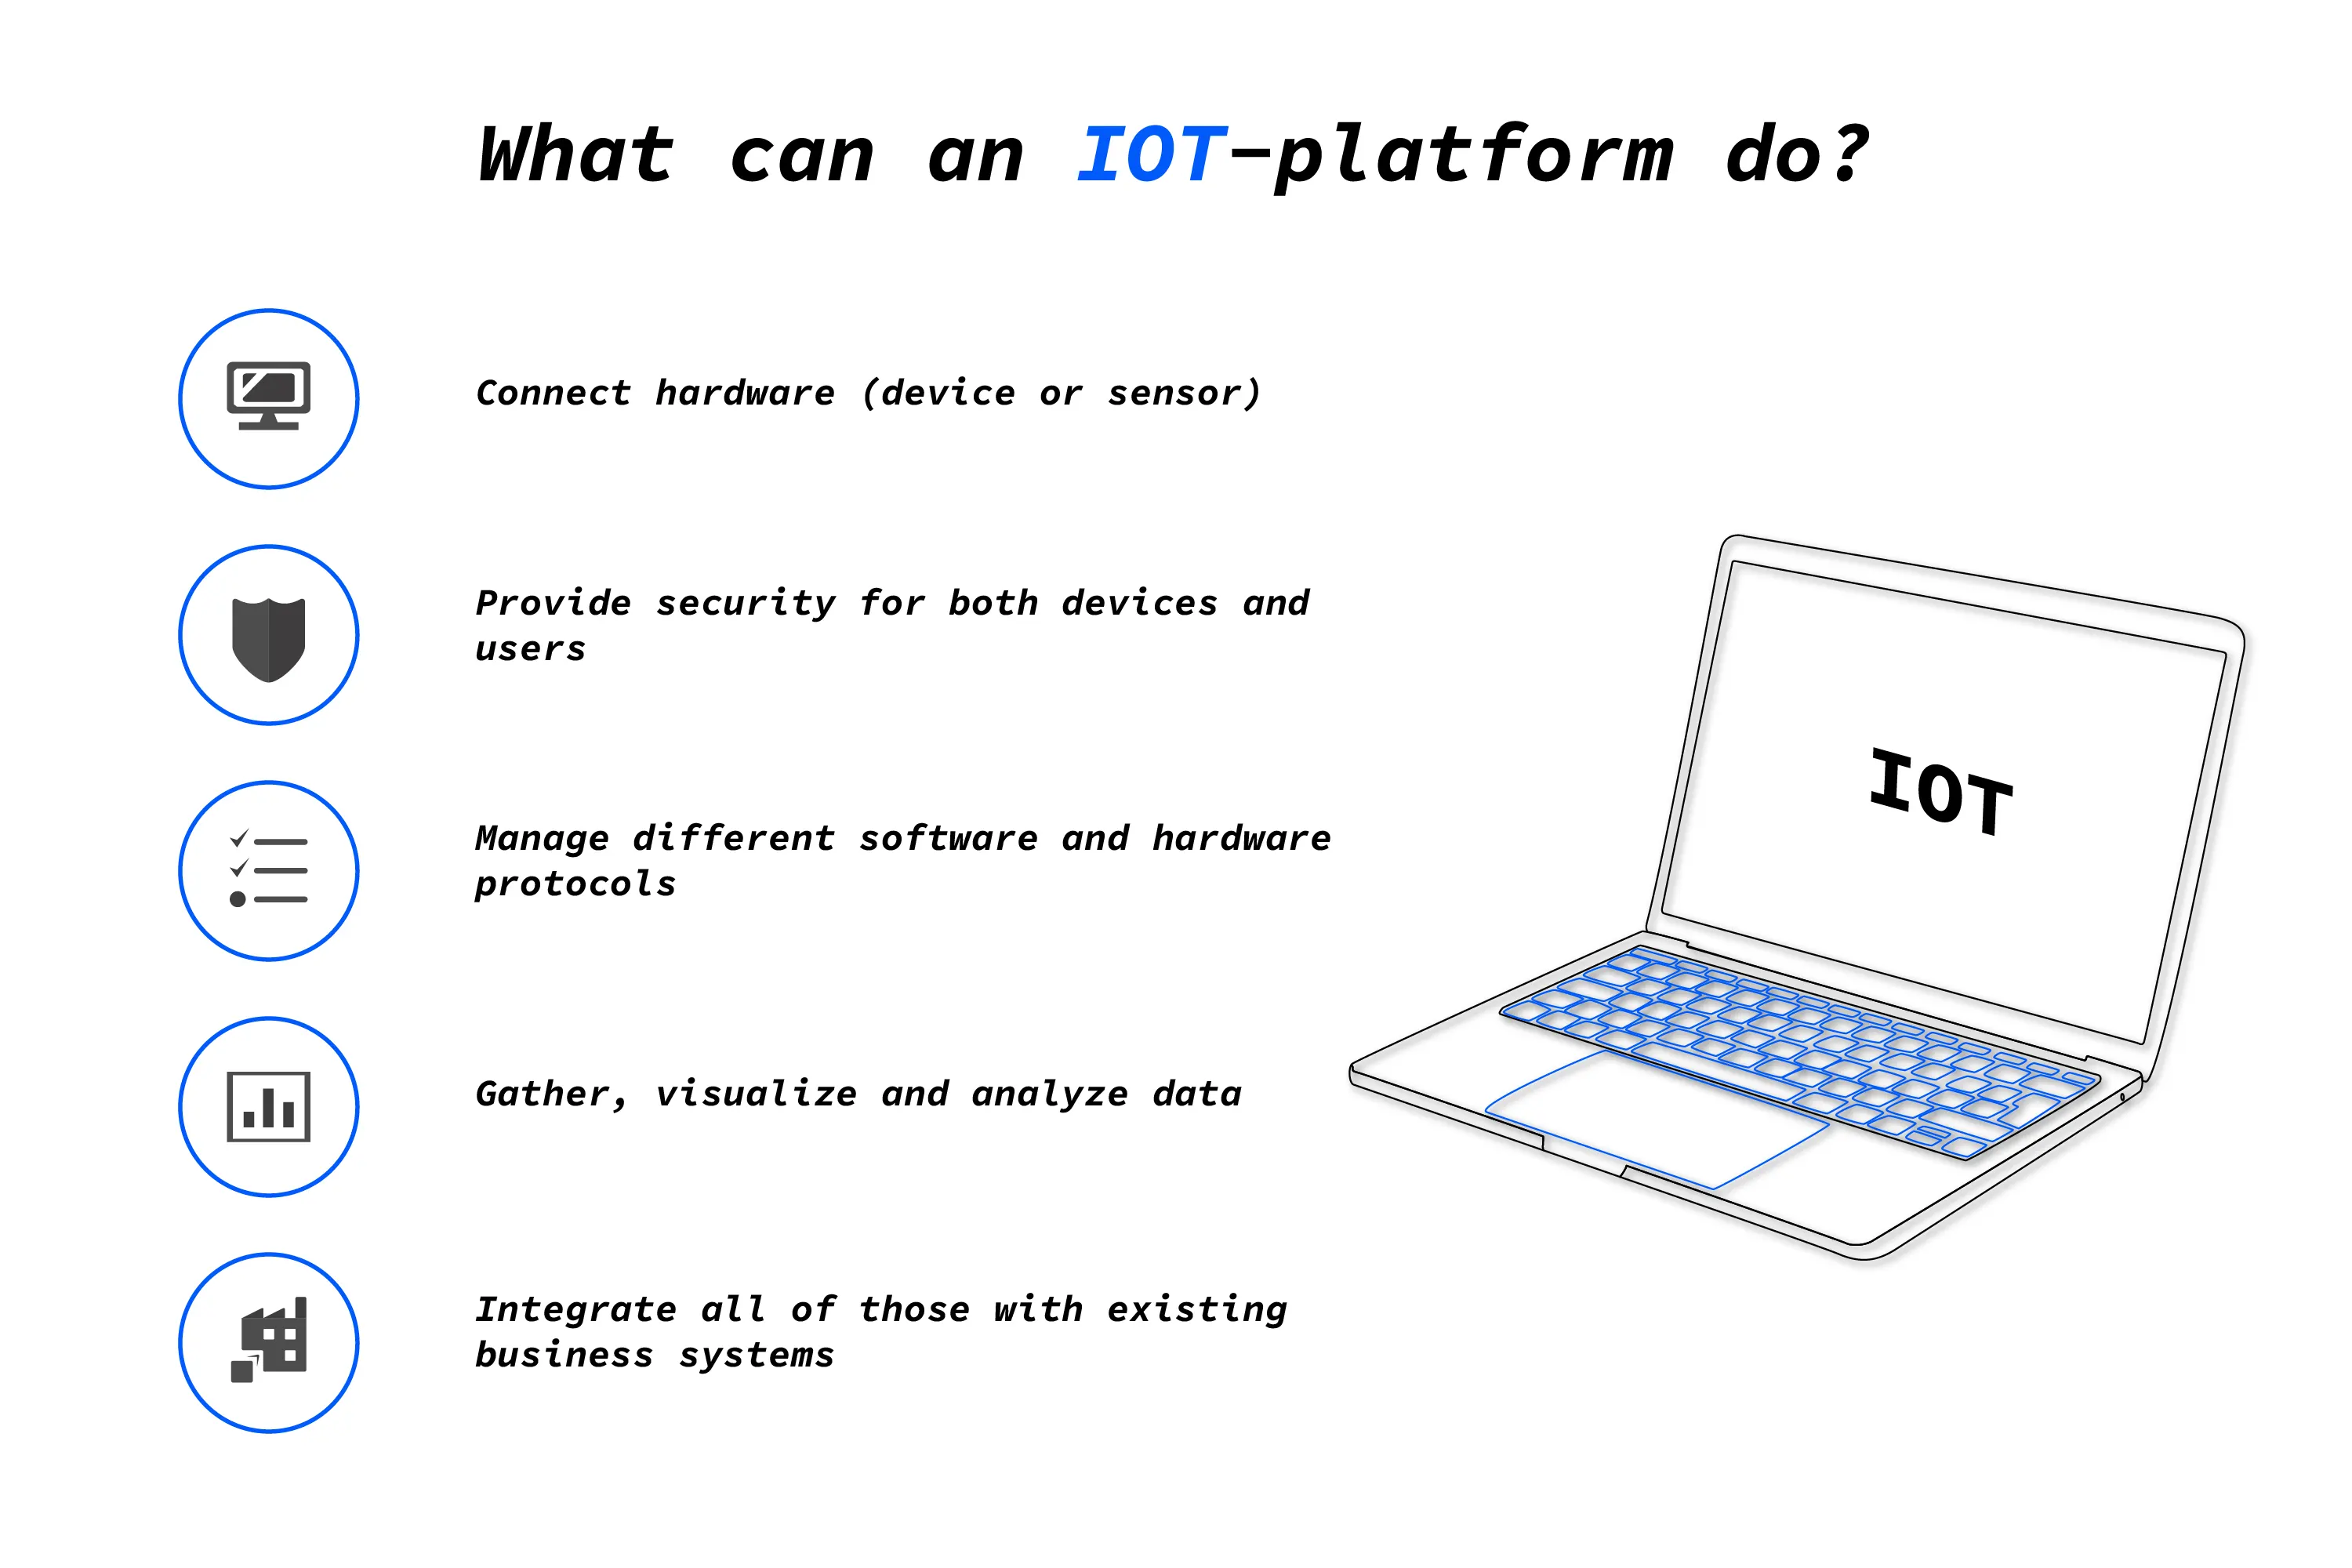 an illustration of what iot platform is capable of doing